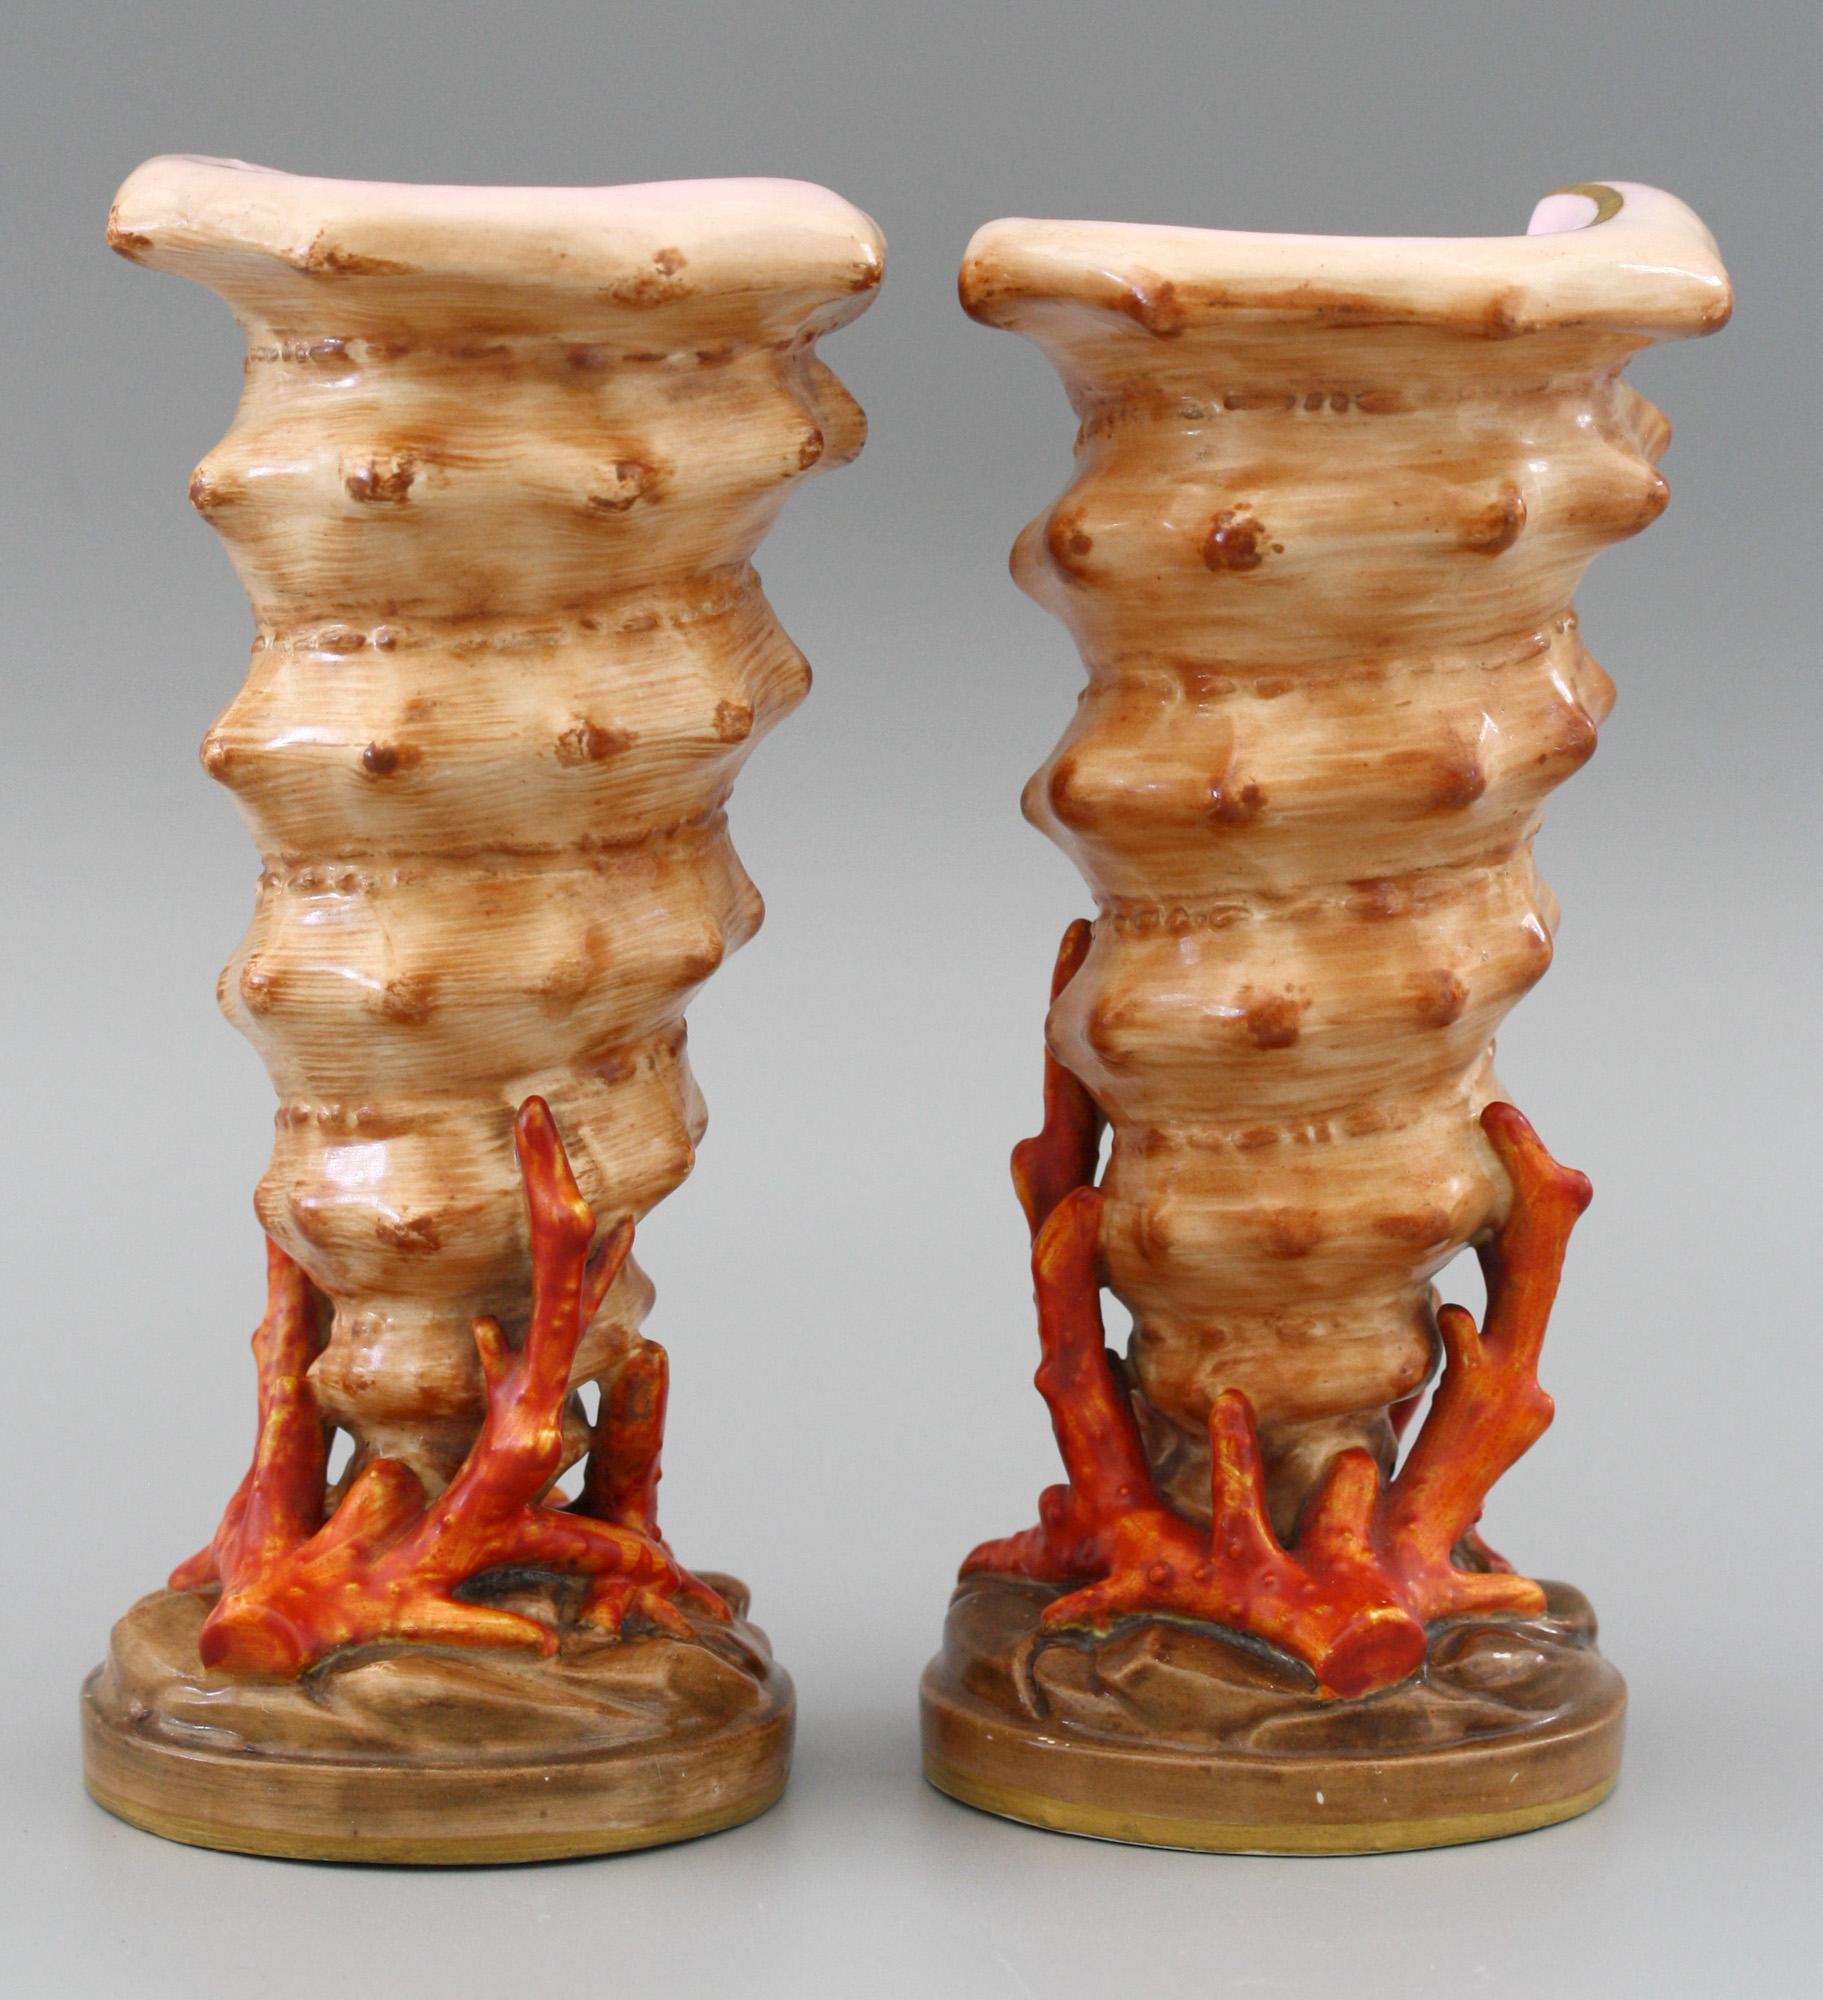 A fine and stylish pair antique Copeland porcelain vases modeled as cornet shaped shells mounted on a rounded base with moulded rocky surface and with coral growing around the bases of the shells. The vases date from circa 1860-1870 and very much